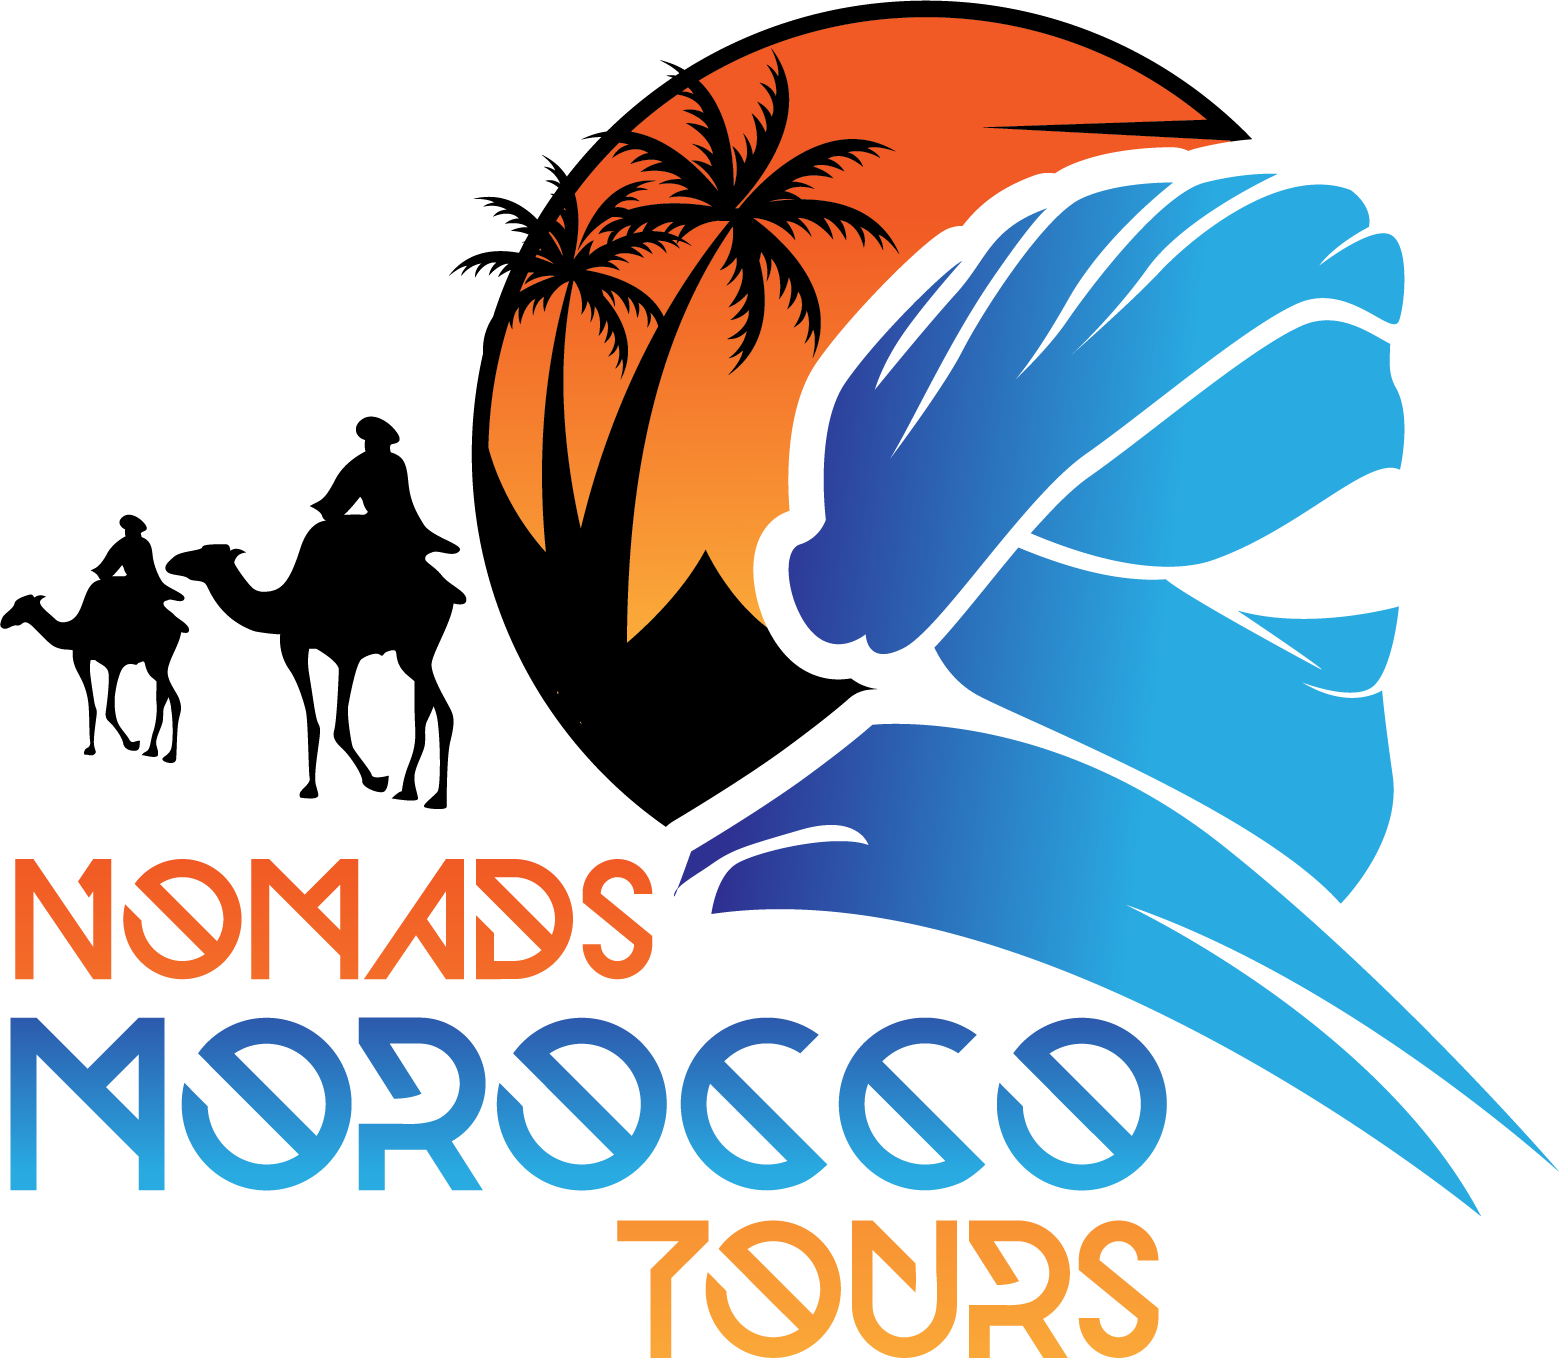 Nomads Morocco Tours